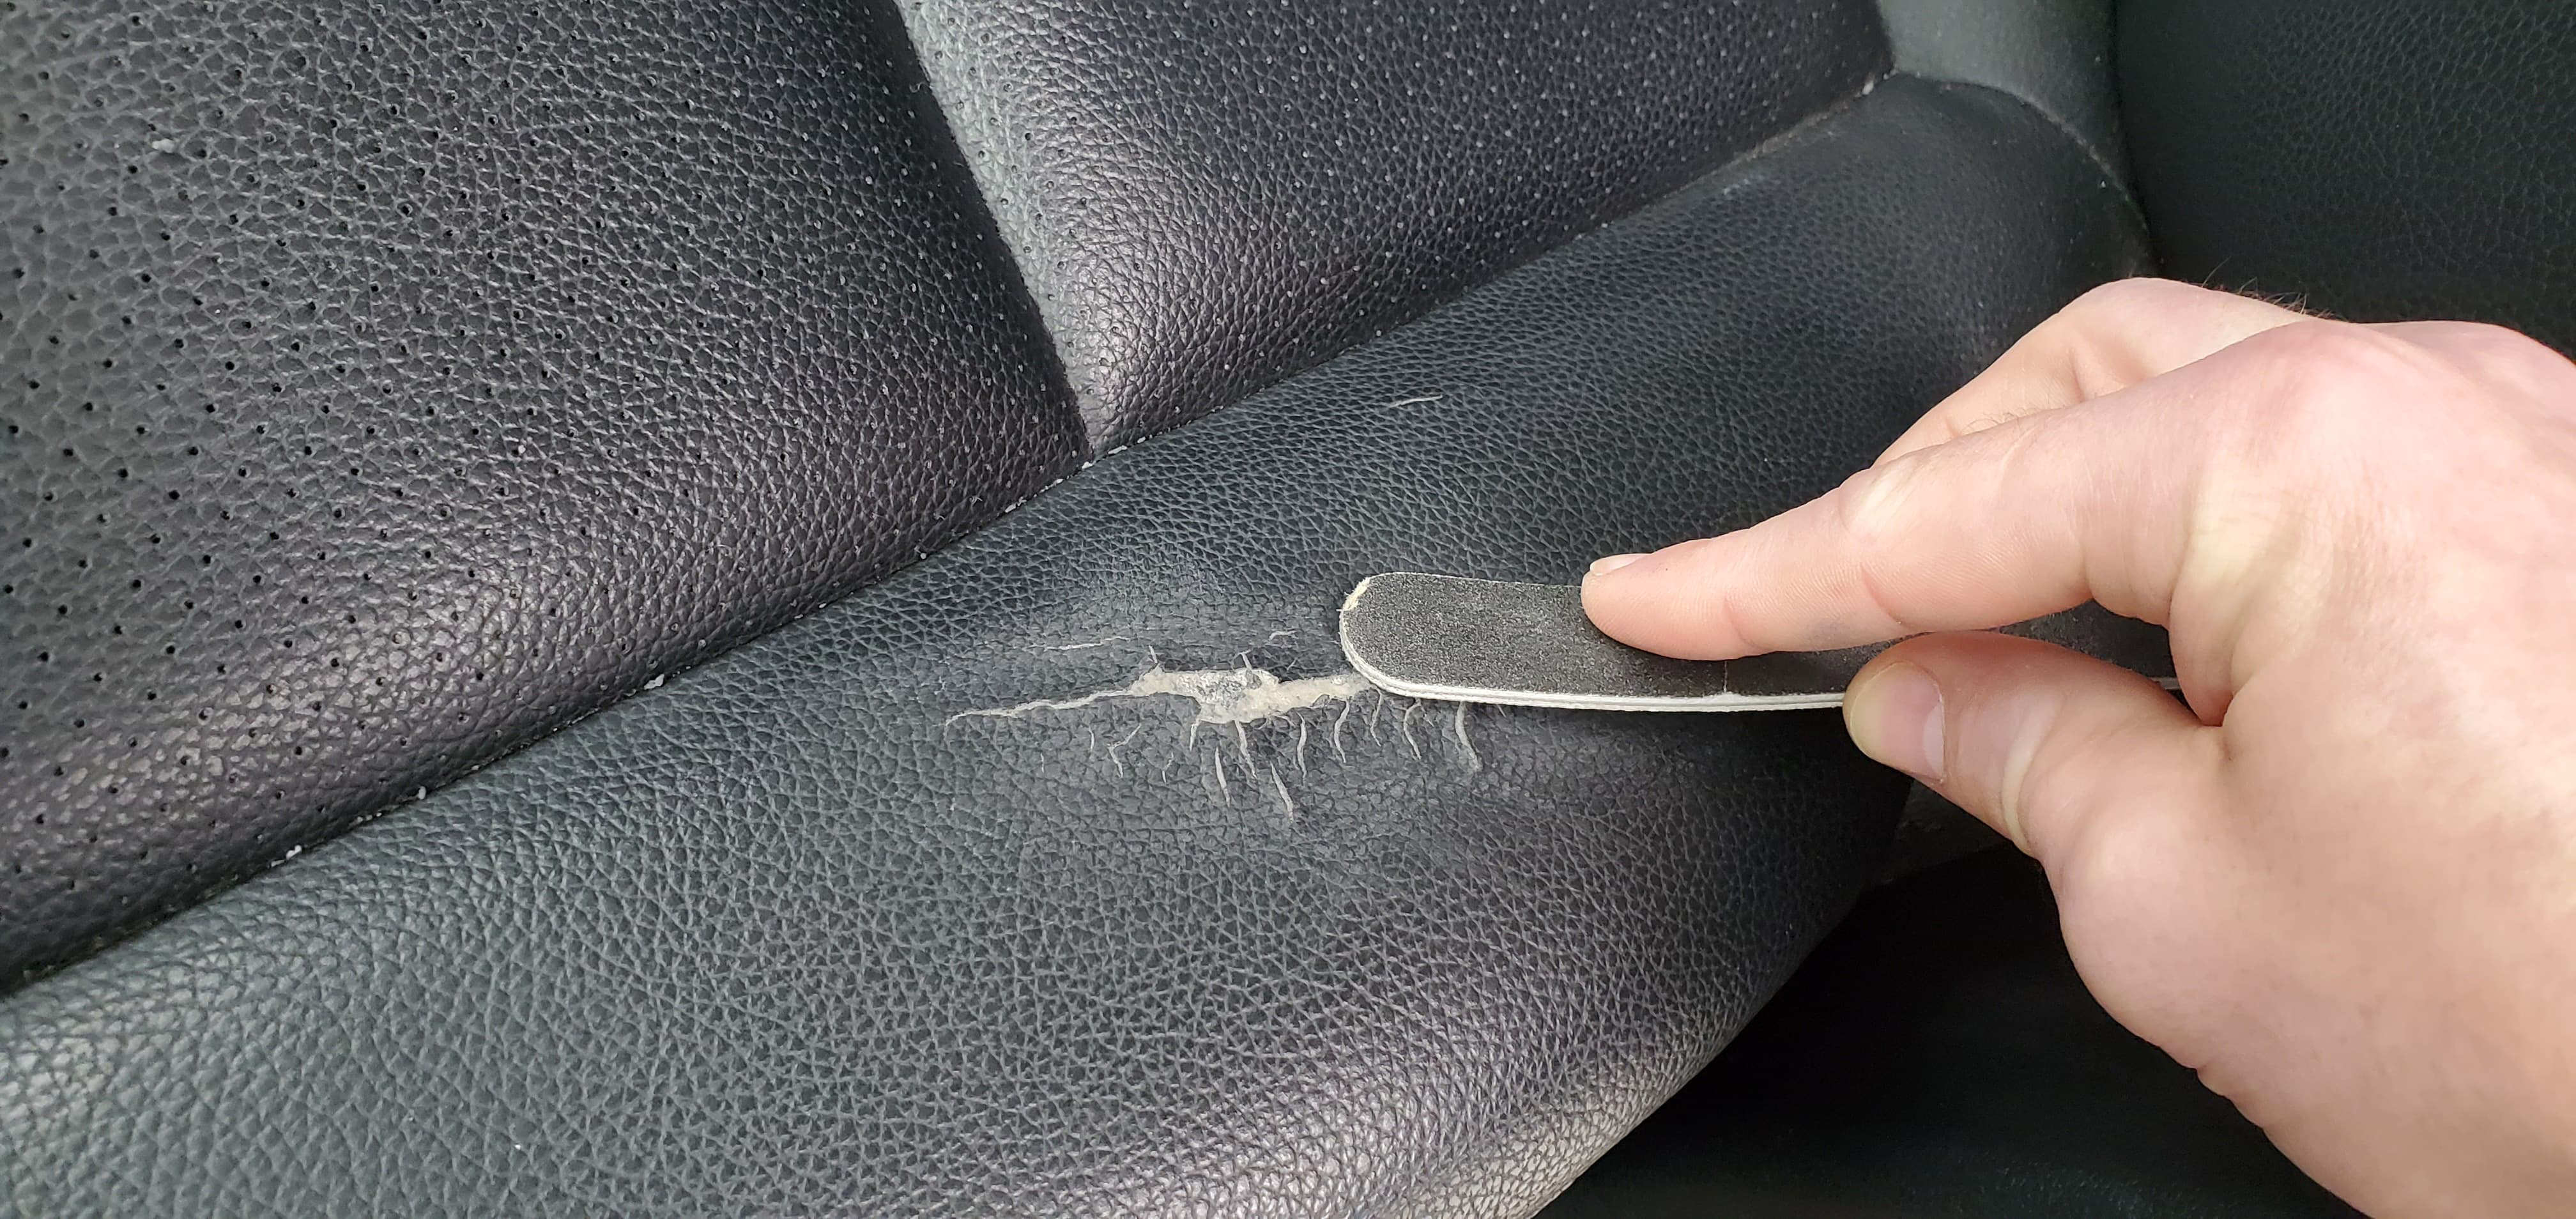 How To Fix Leather Tear How To Repair A Leather Car Seat